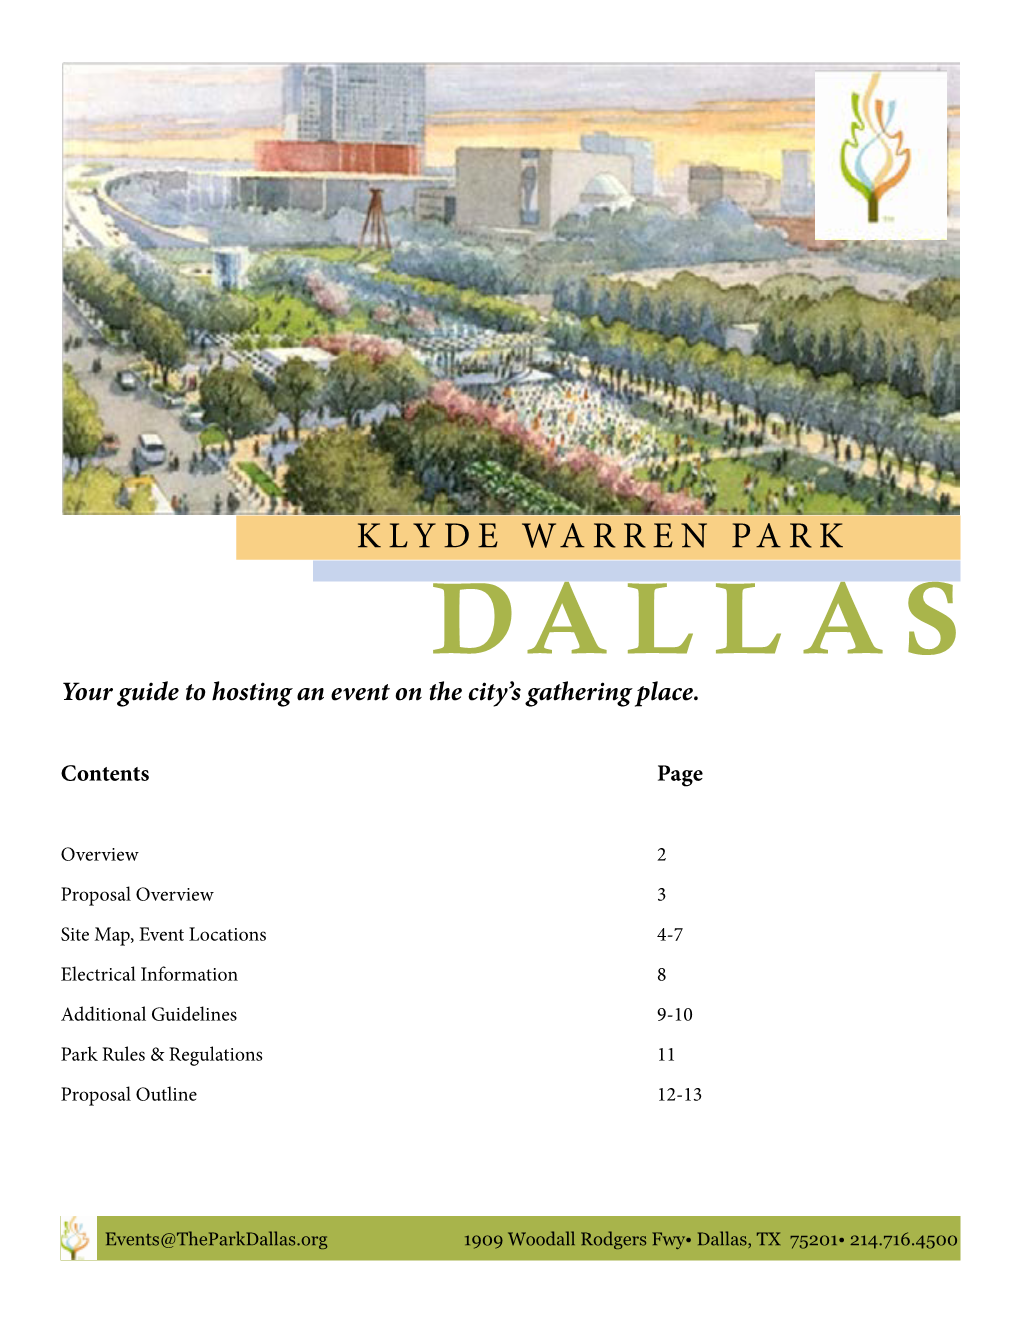 KLYDE WARREN PARK DALLAS Your Guide to Hosting an Event on the City’S Gathering Place